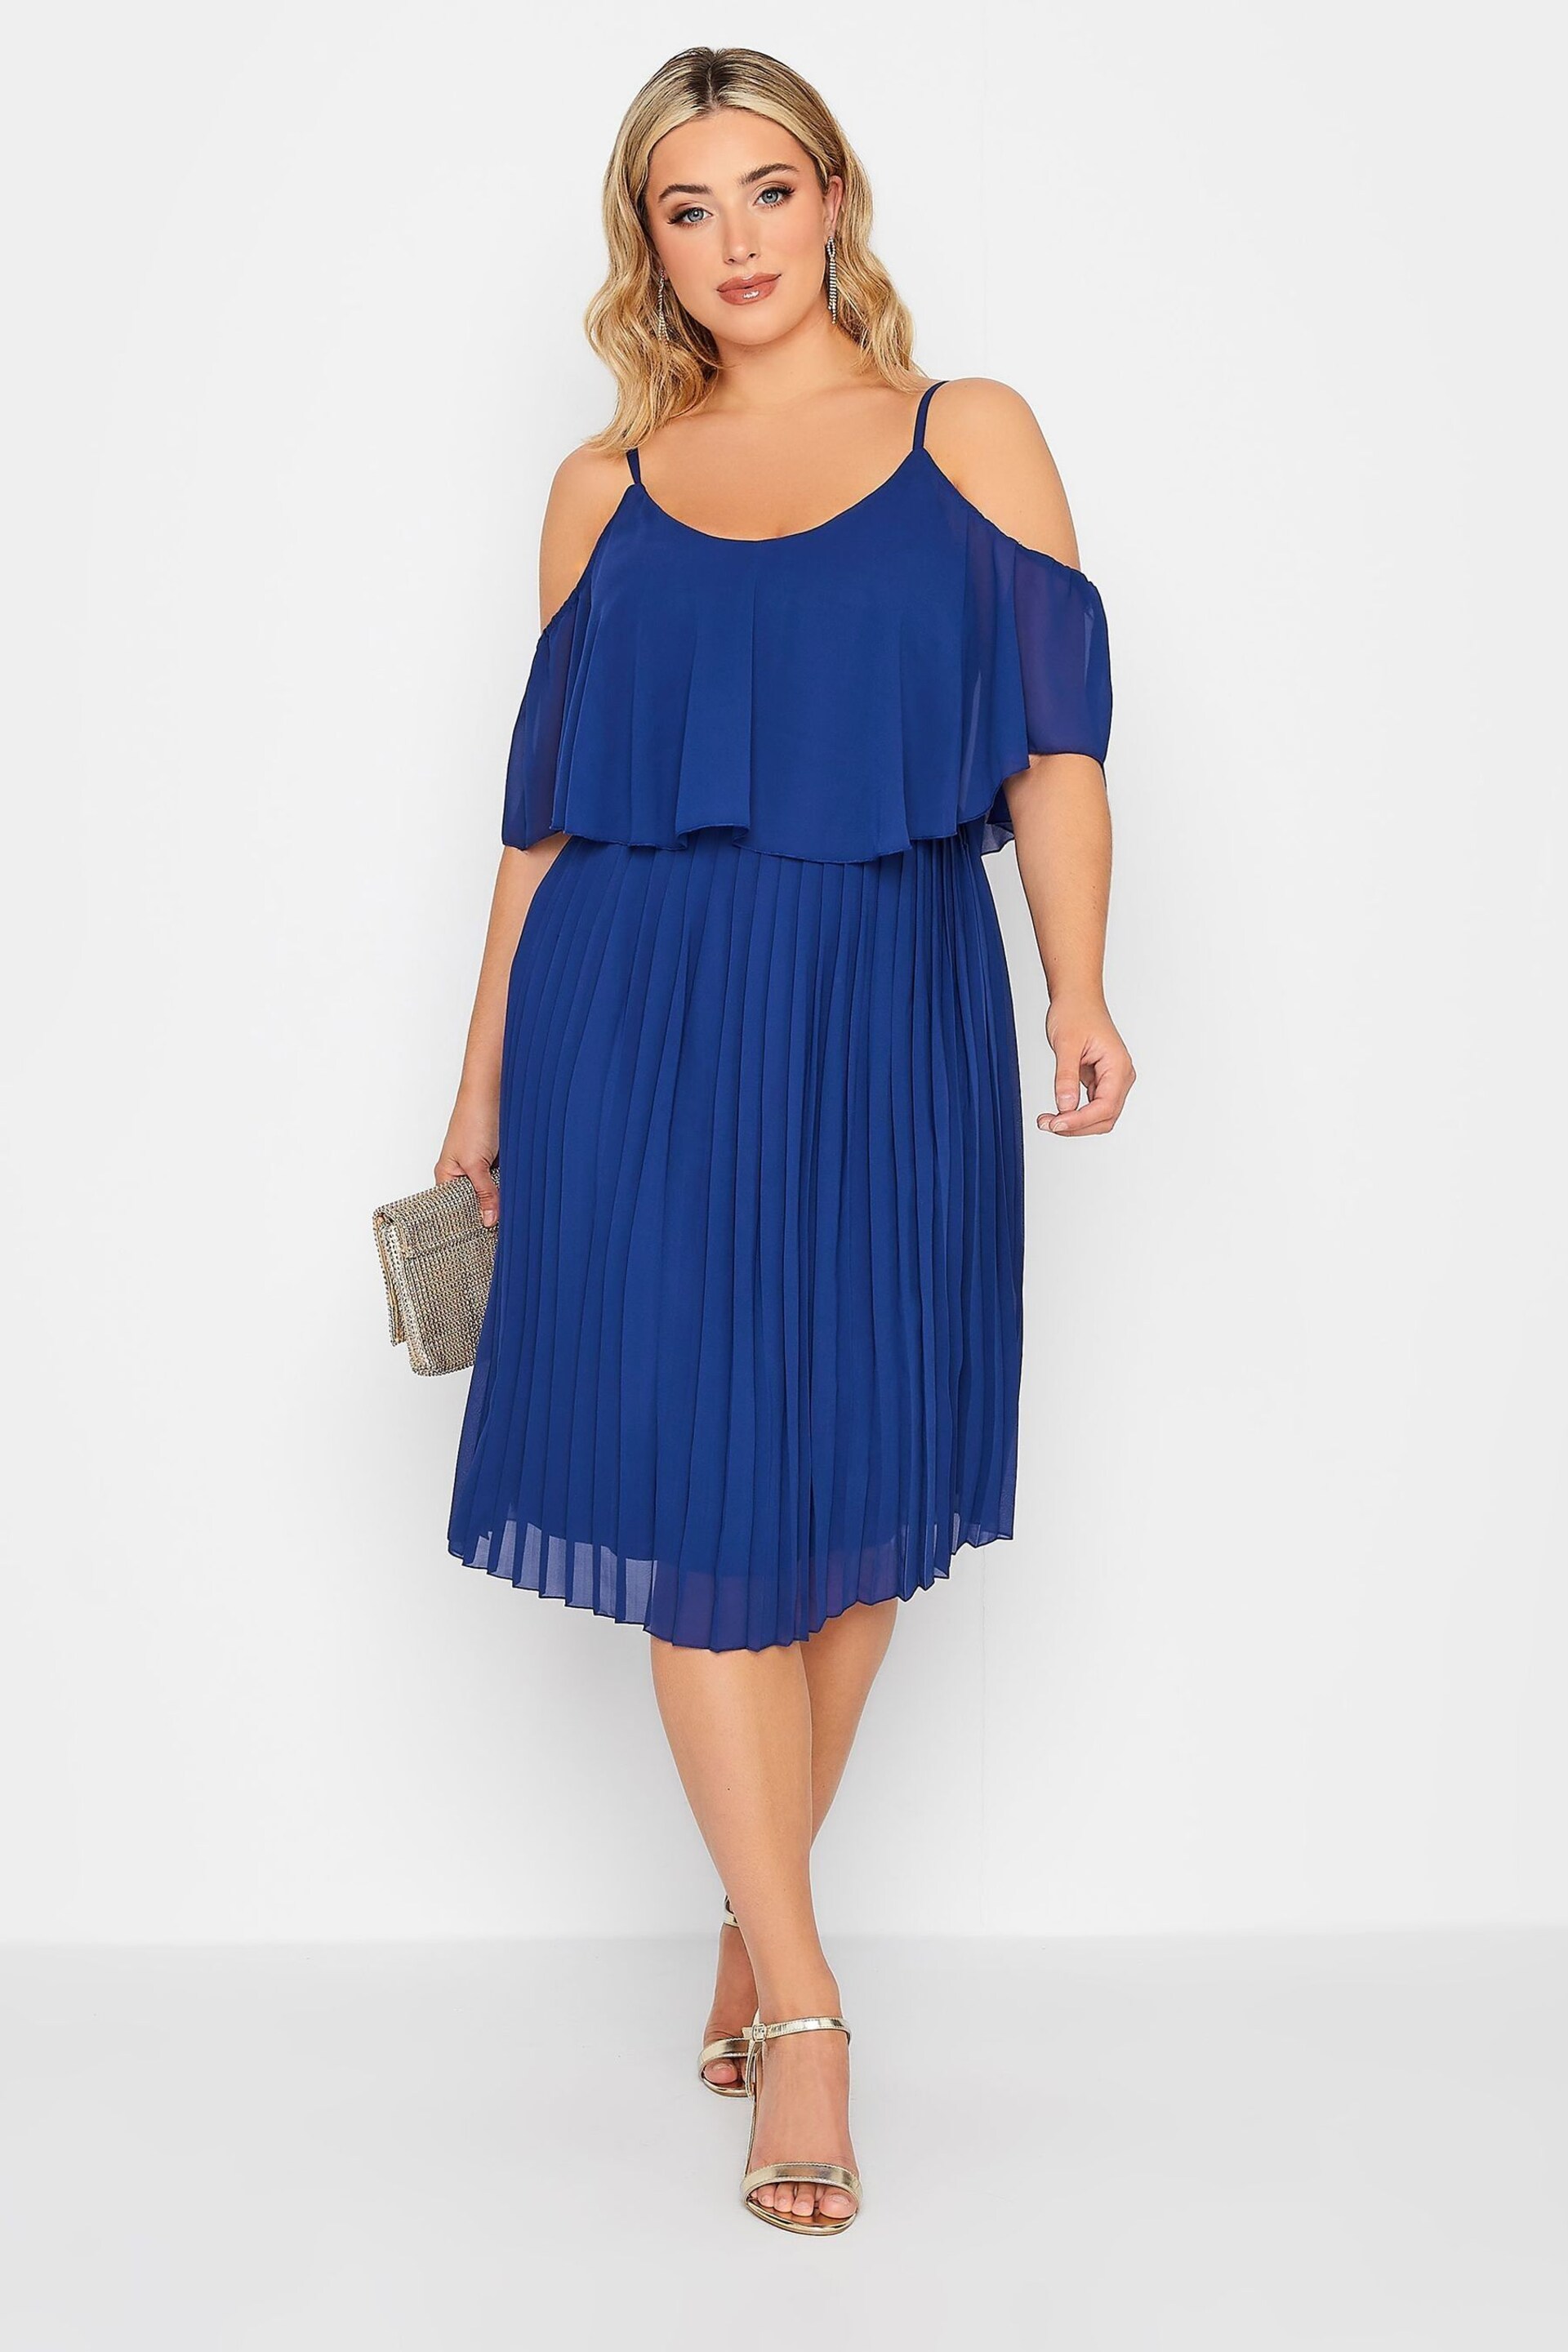 Yours Curve Blue London Pleat Overlay Dress - Image 3 of 5